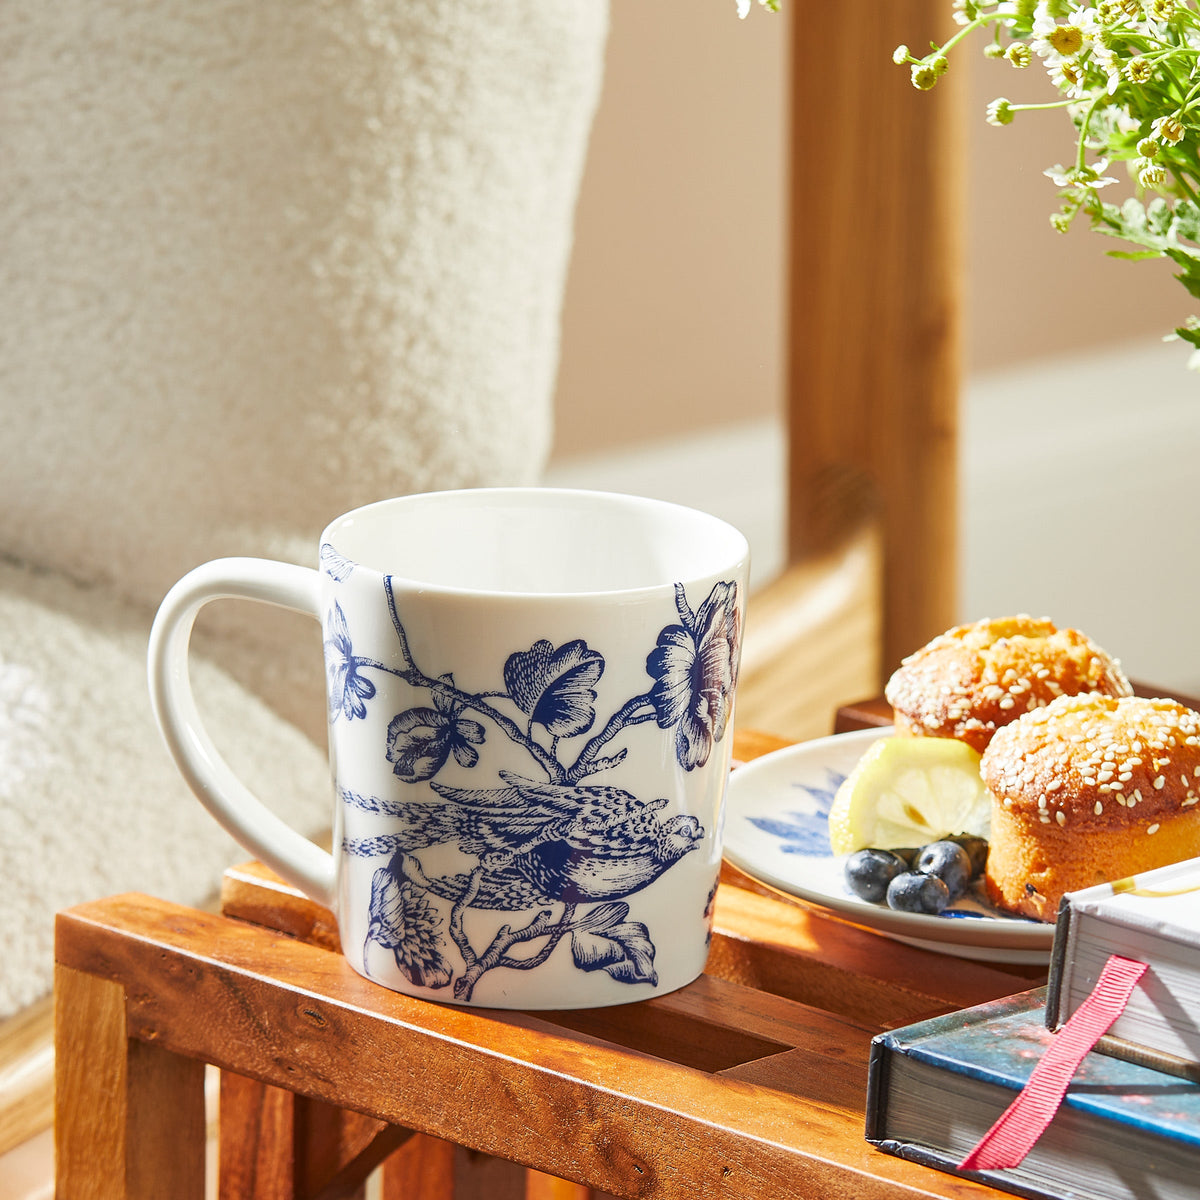 A Chinoiserie Toile Mug Blue from Caskata Artisanal Home on a tray with muffins and a book from an archival collection.